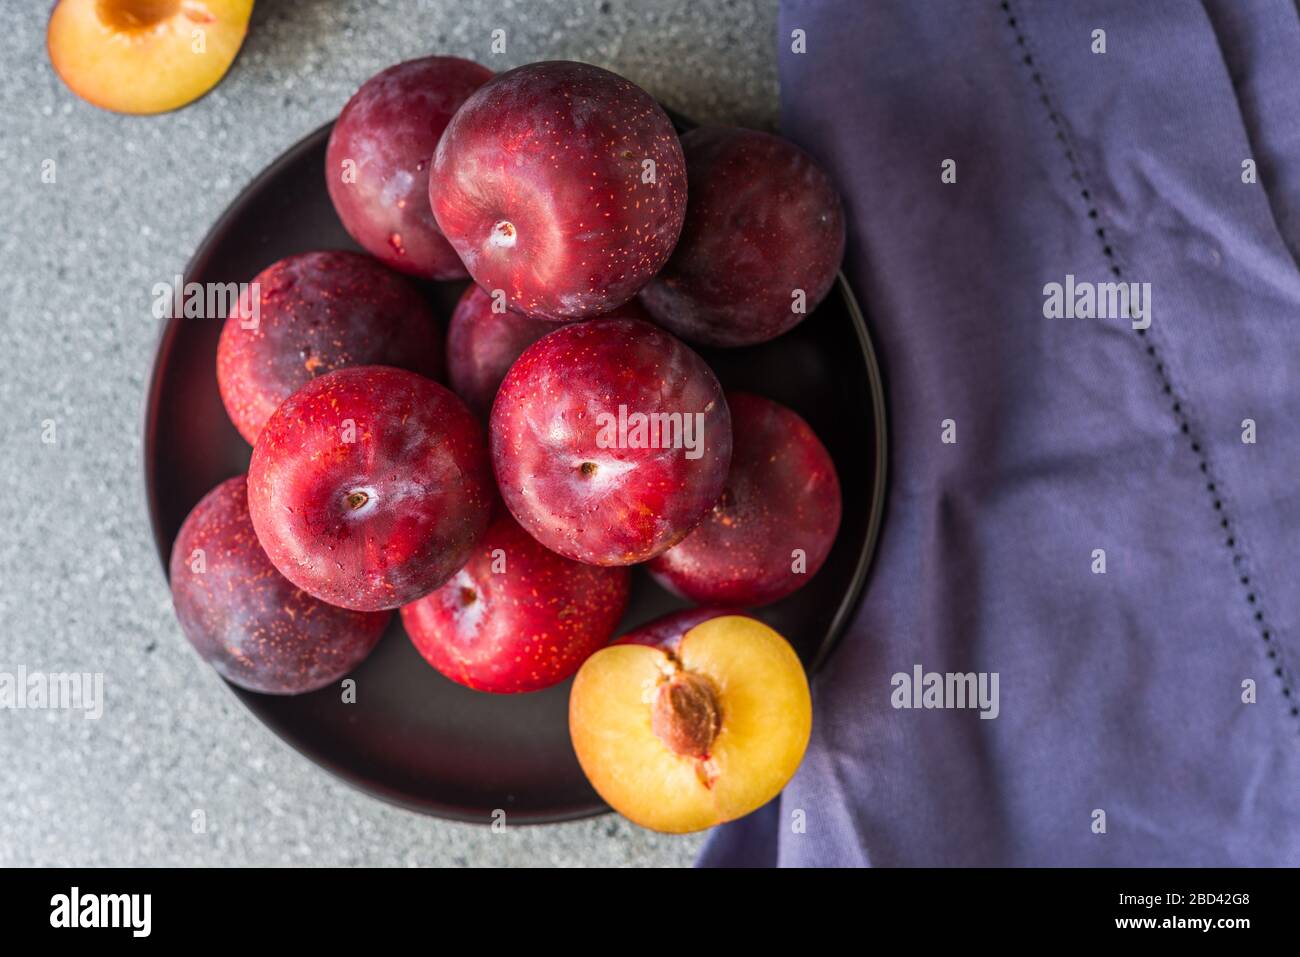 Red organic plums against grey stone background. Stock Photo